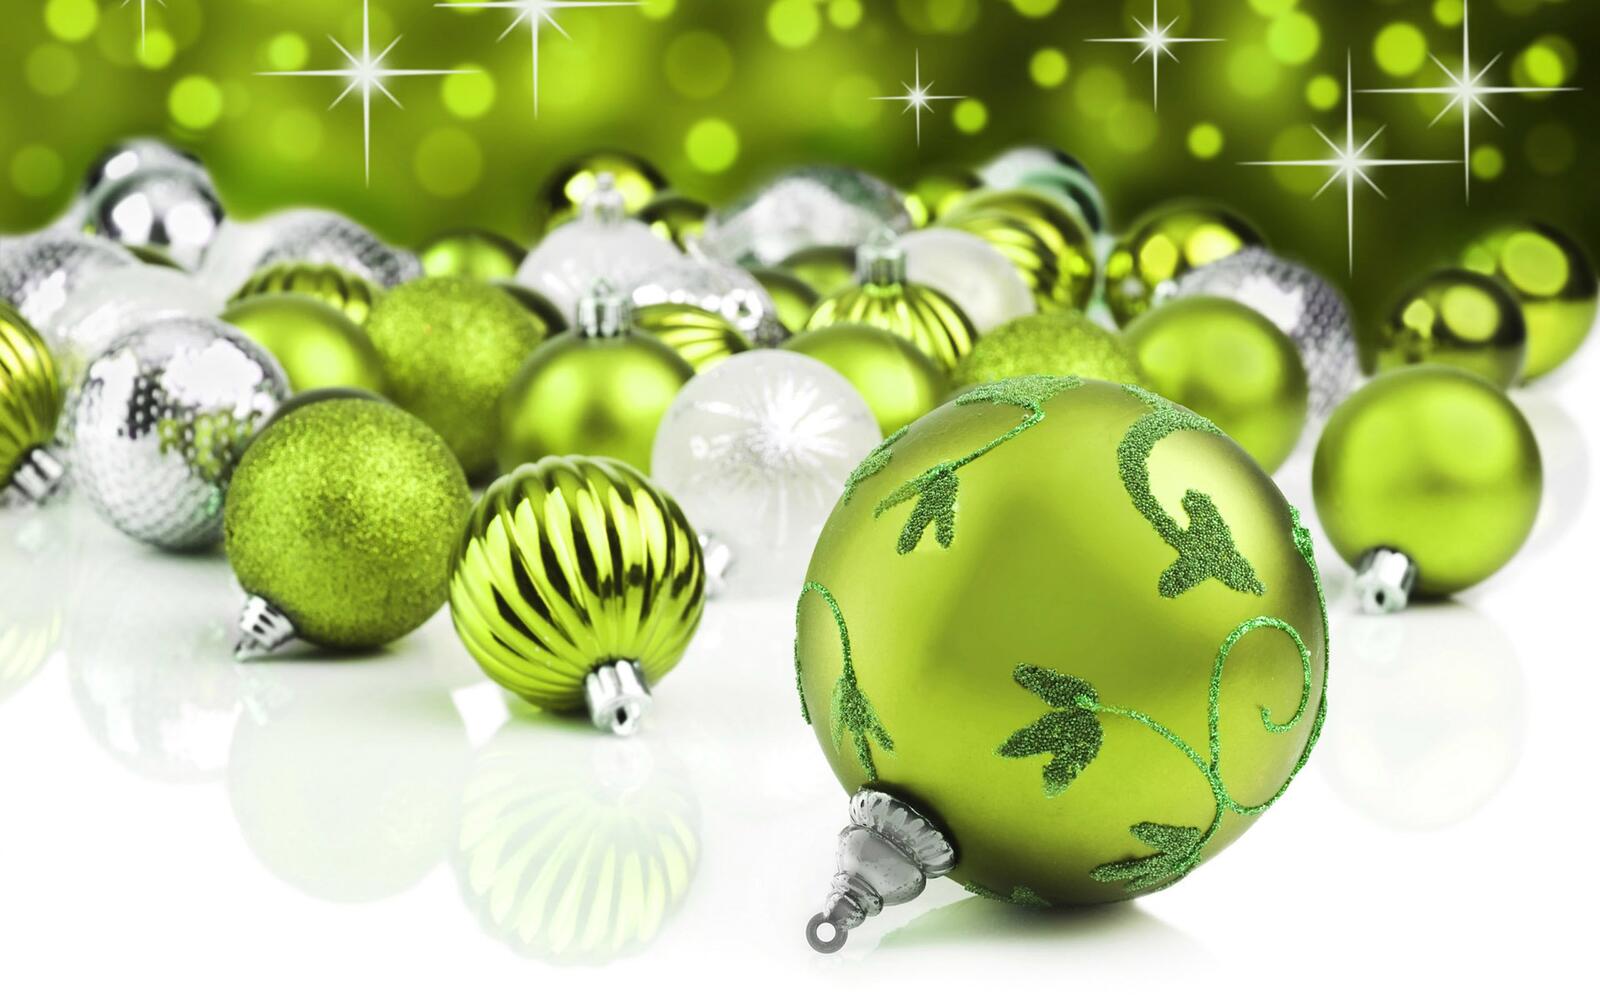 Free photo Picture with Christmas toys in green color